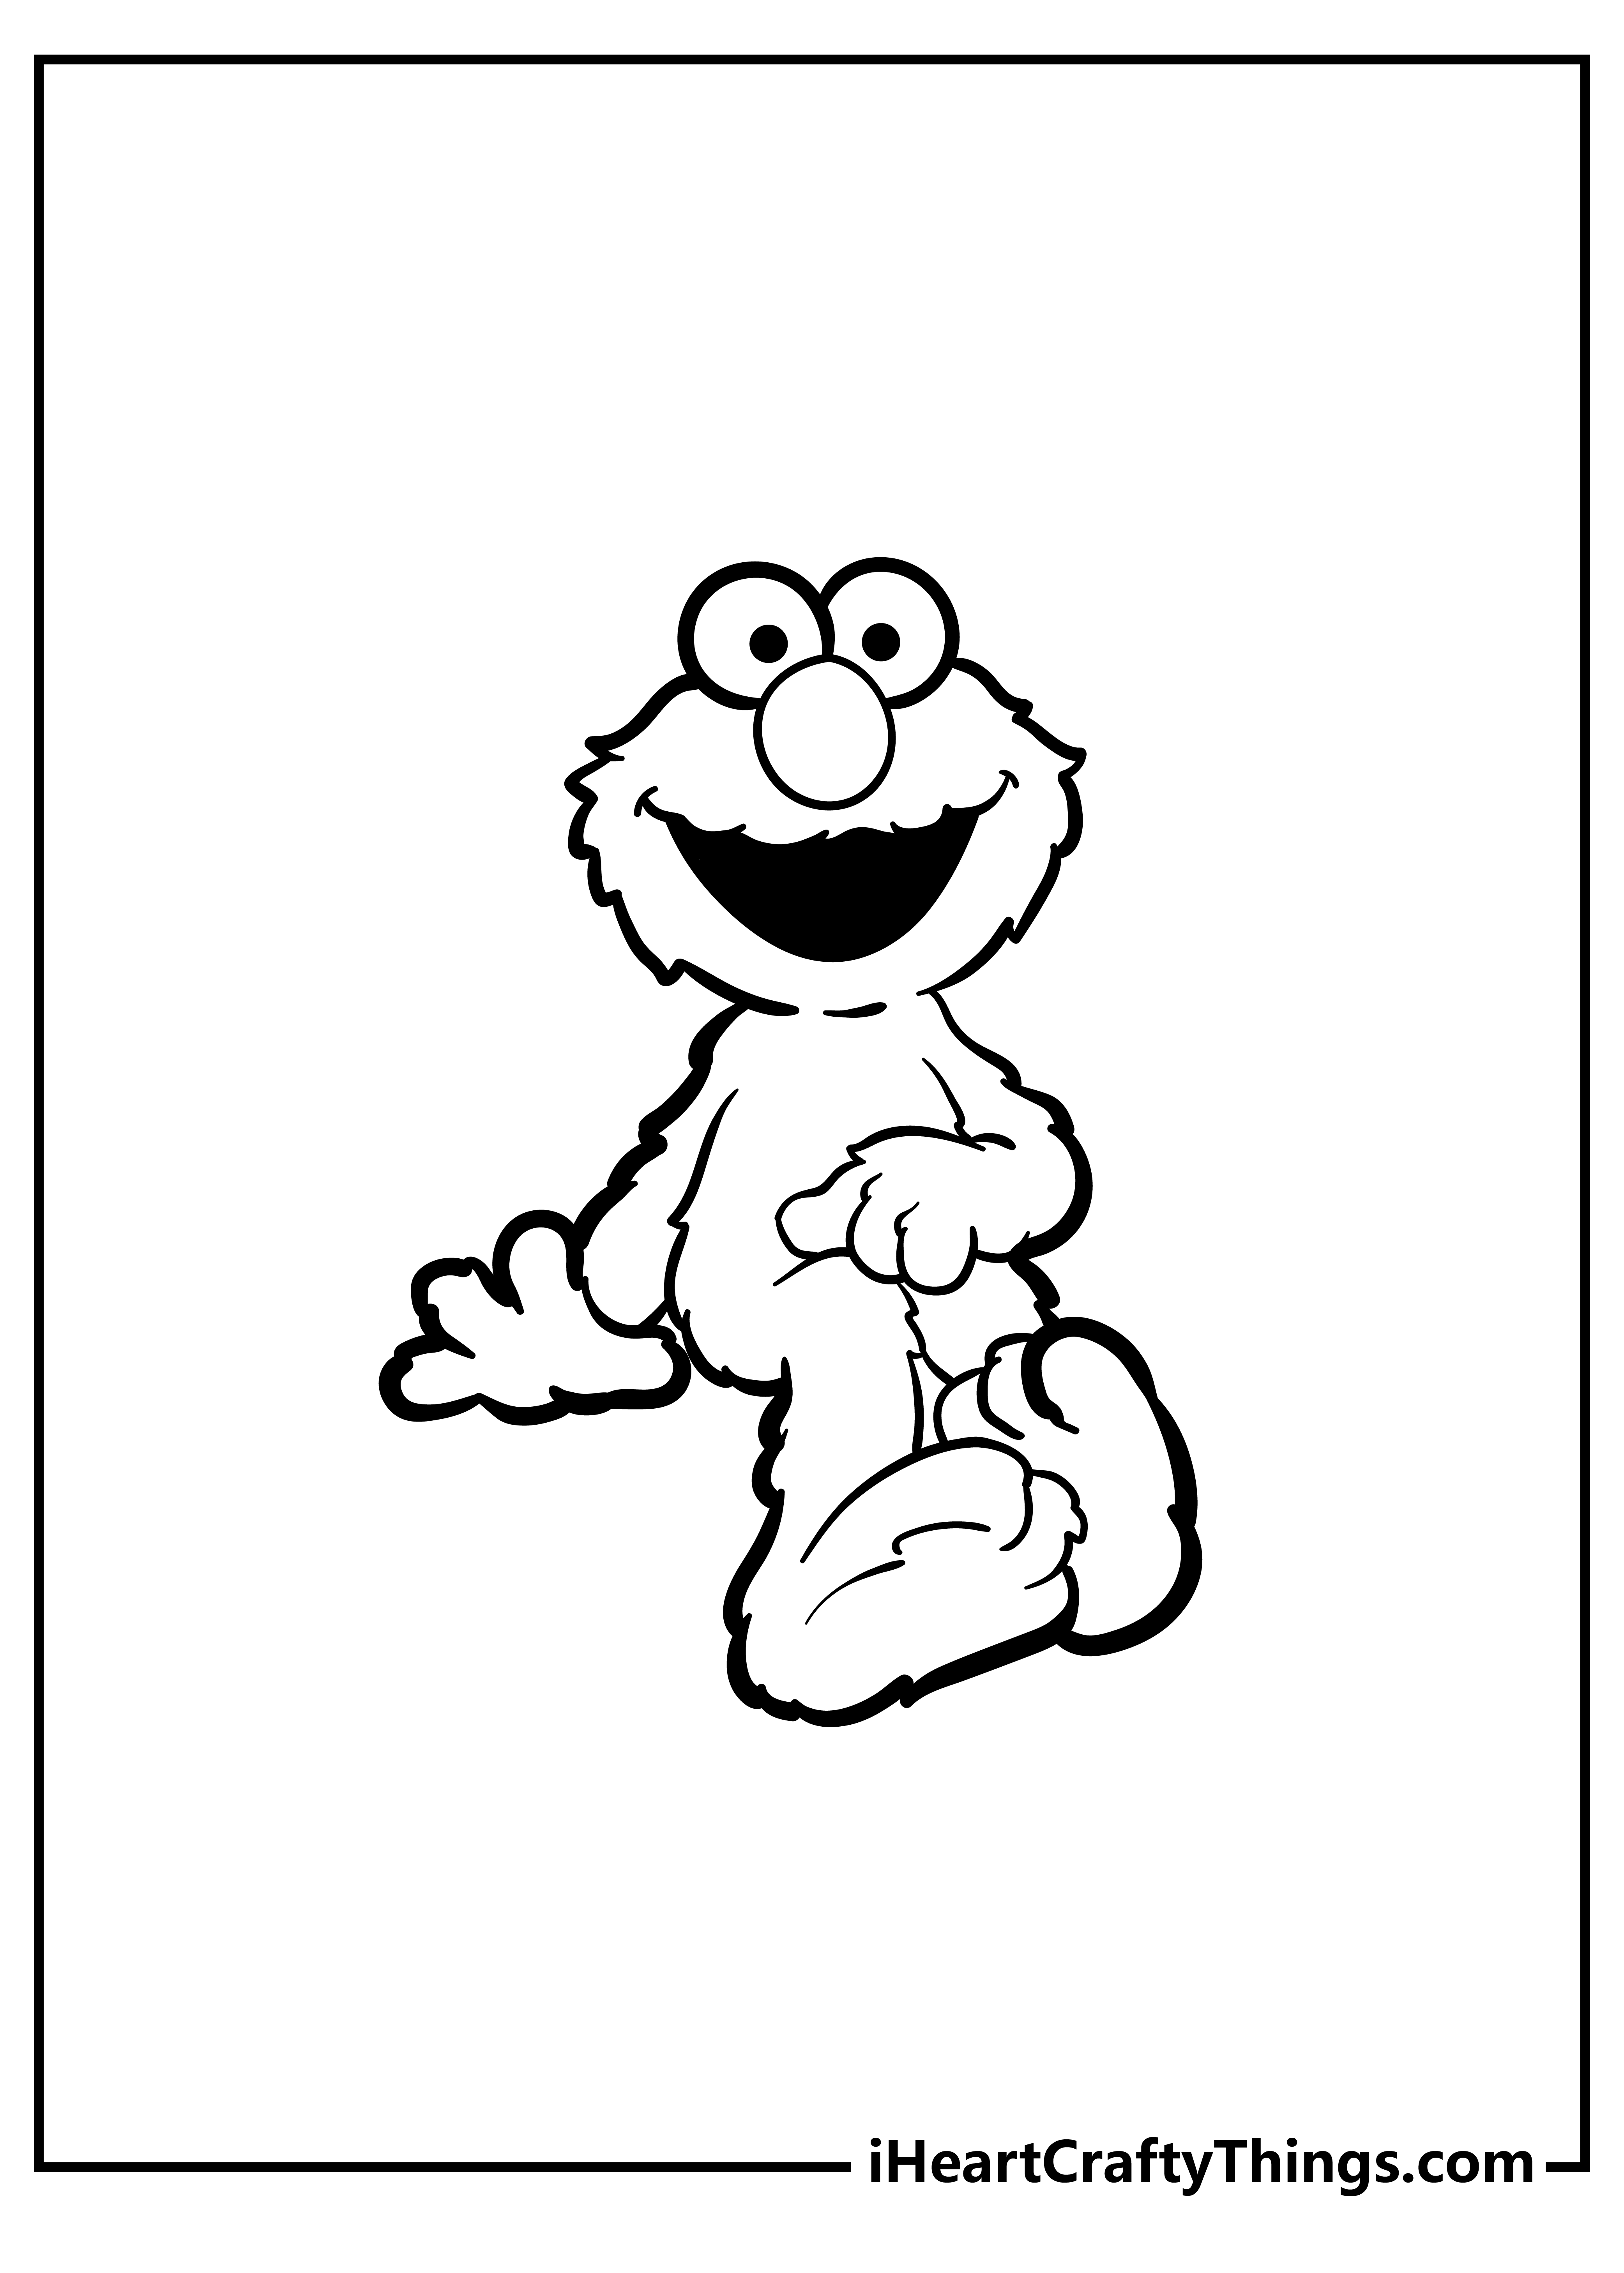 Elmo Coloring Sheet for children free download